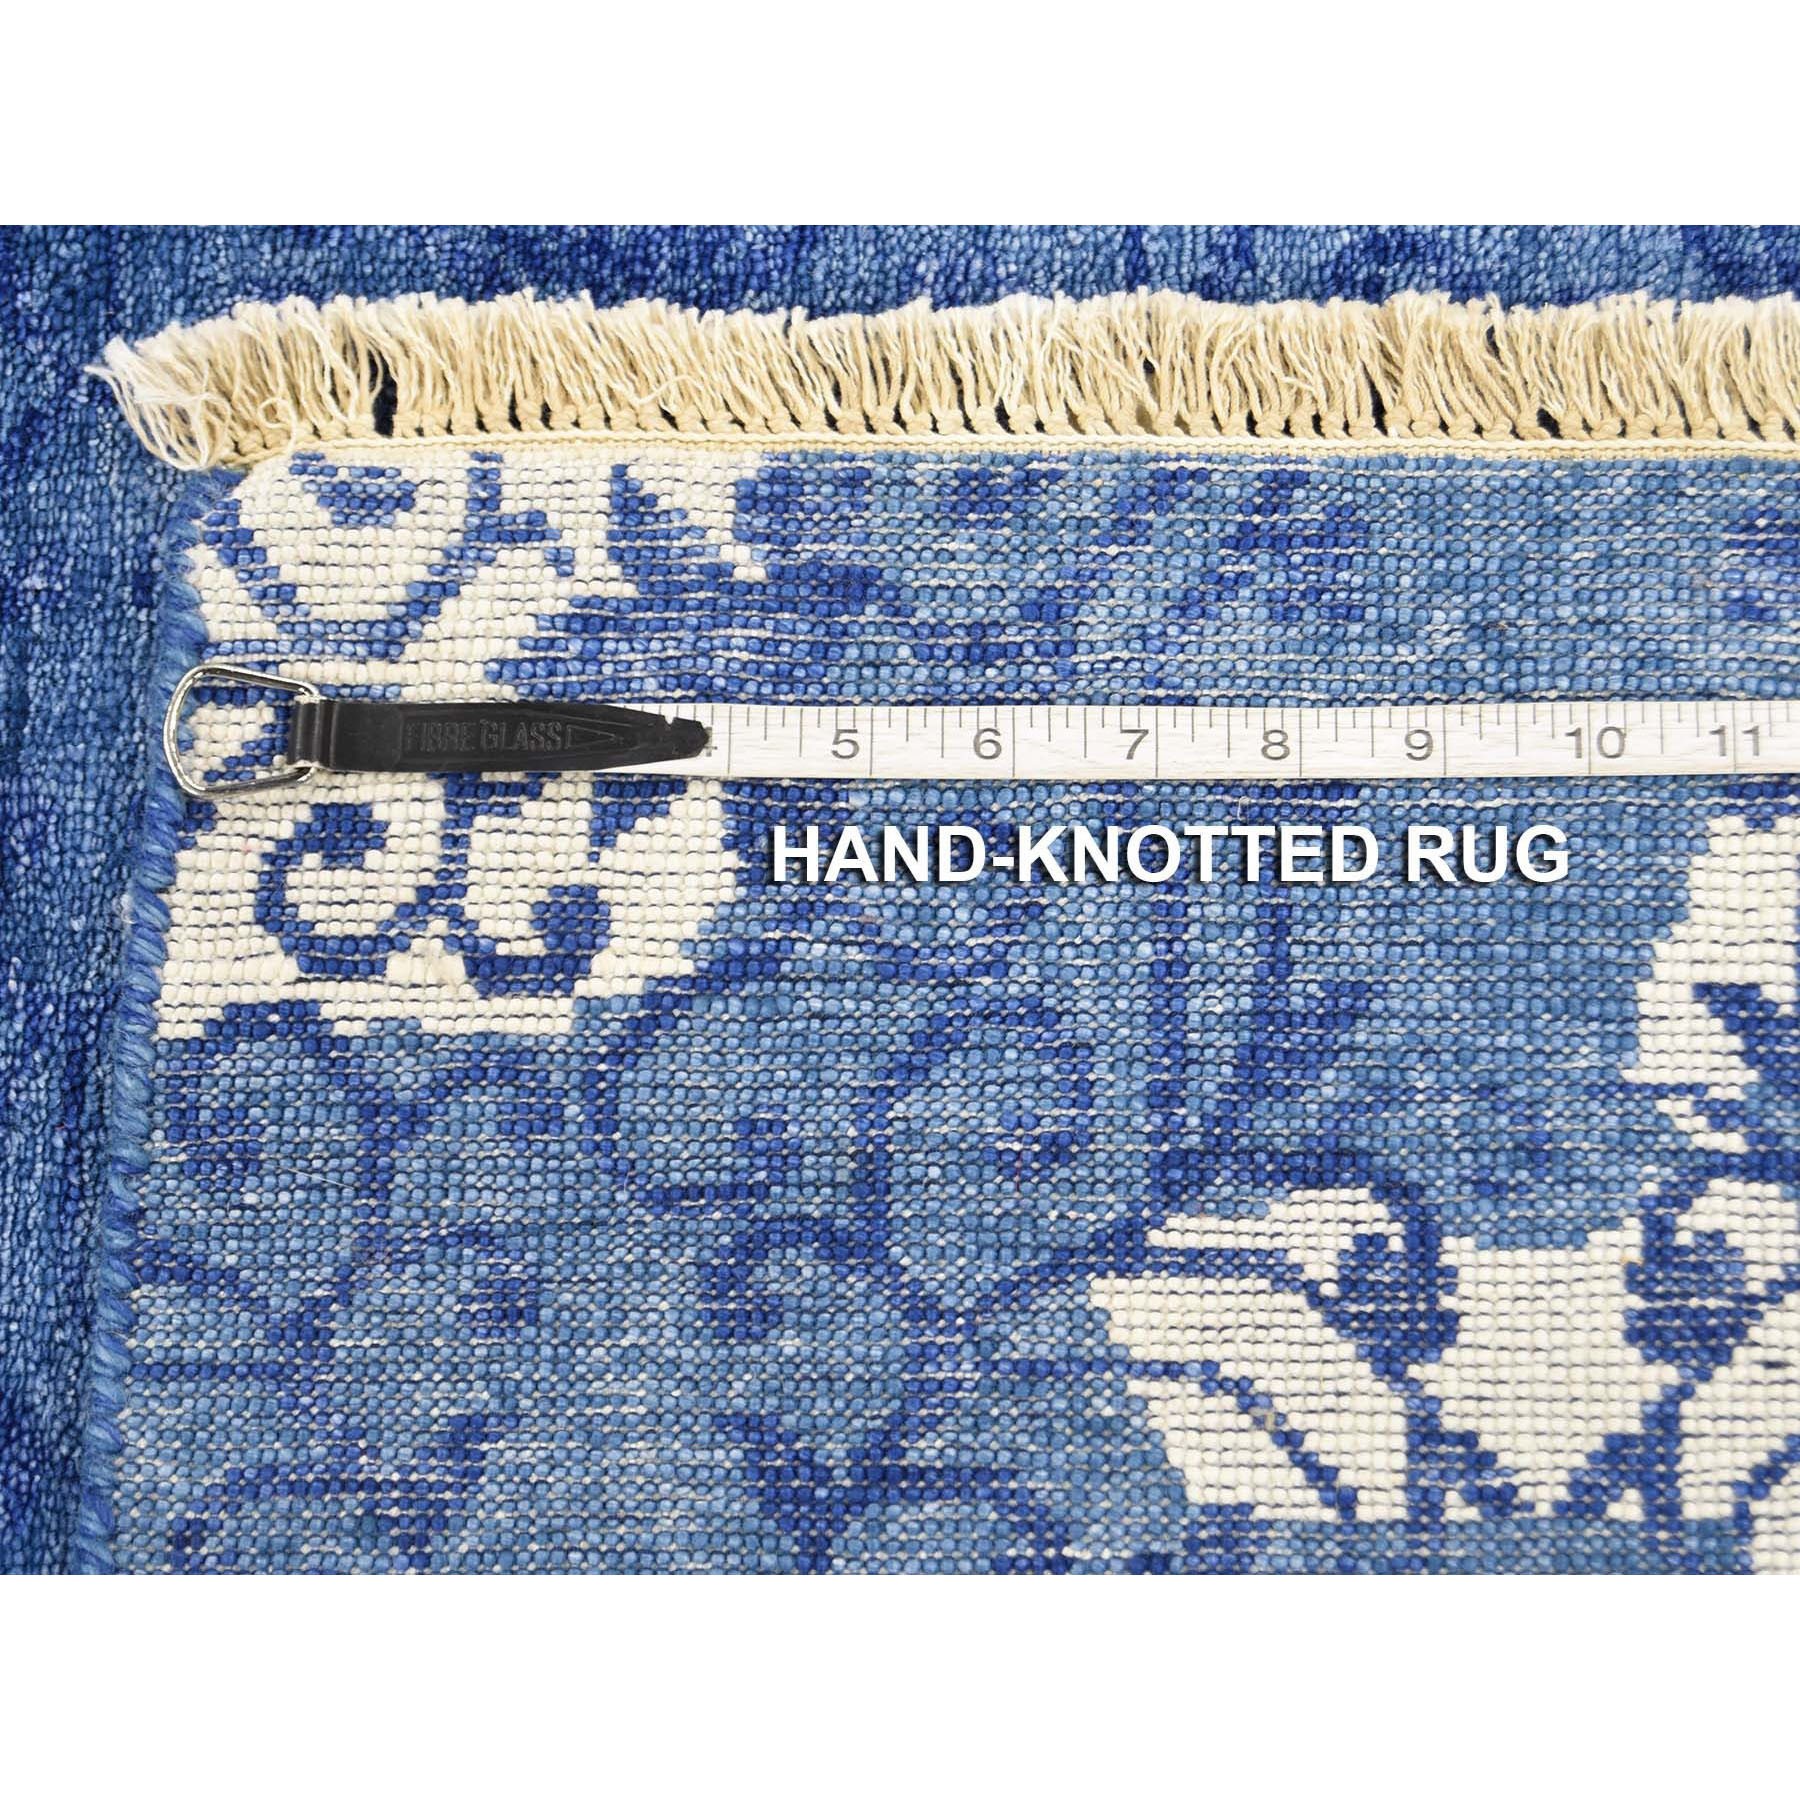 5-6 x8-  Blue Hand Knotted Tone on Tone Modern Wool and Silk Oriental Rug 